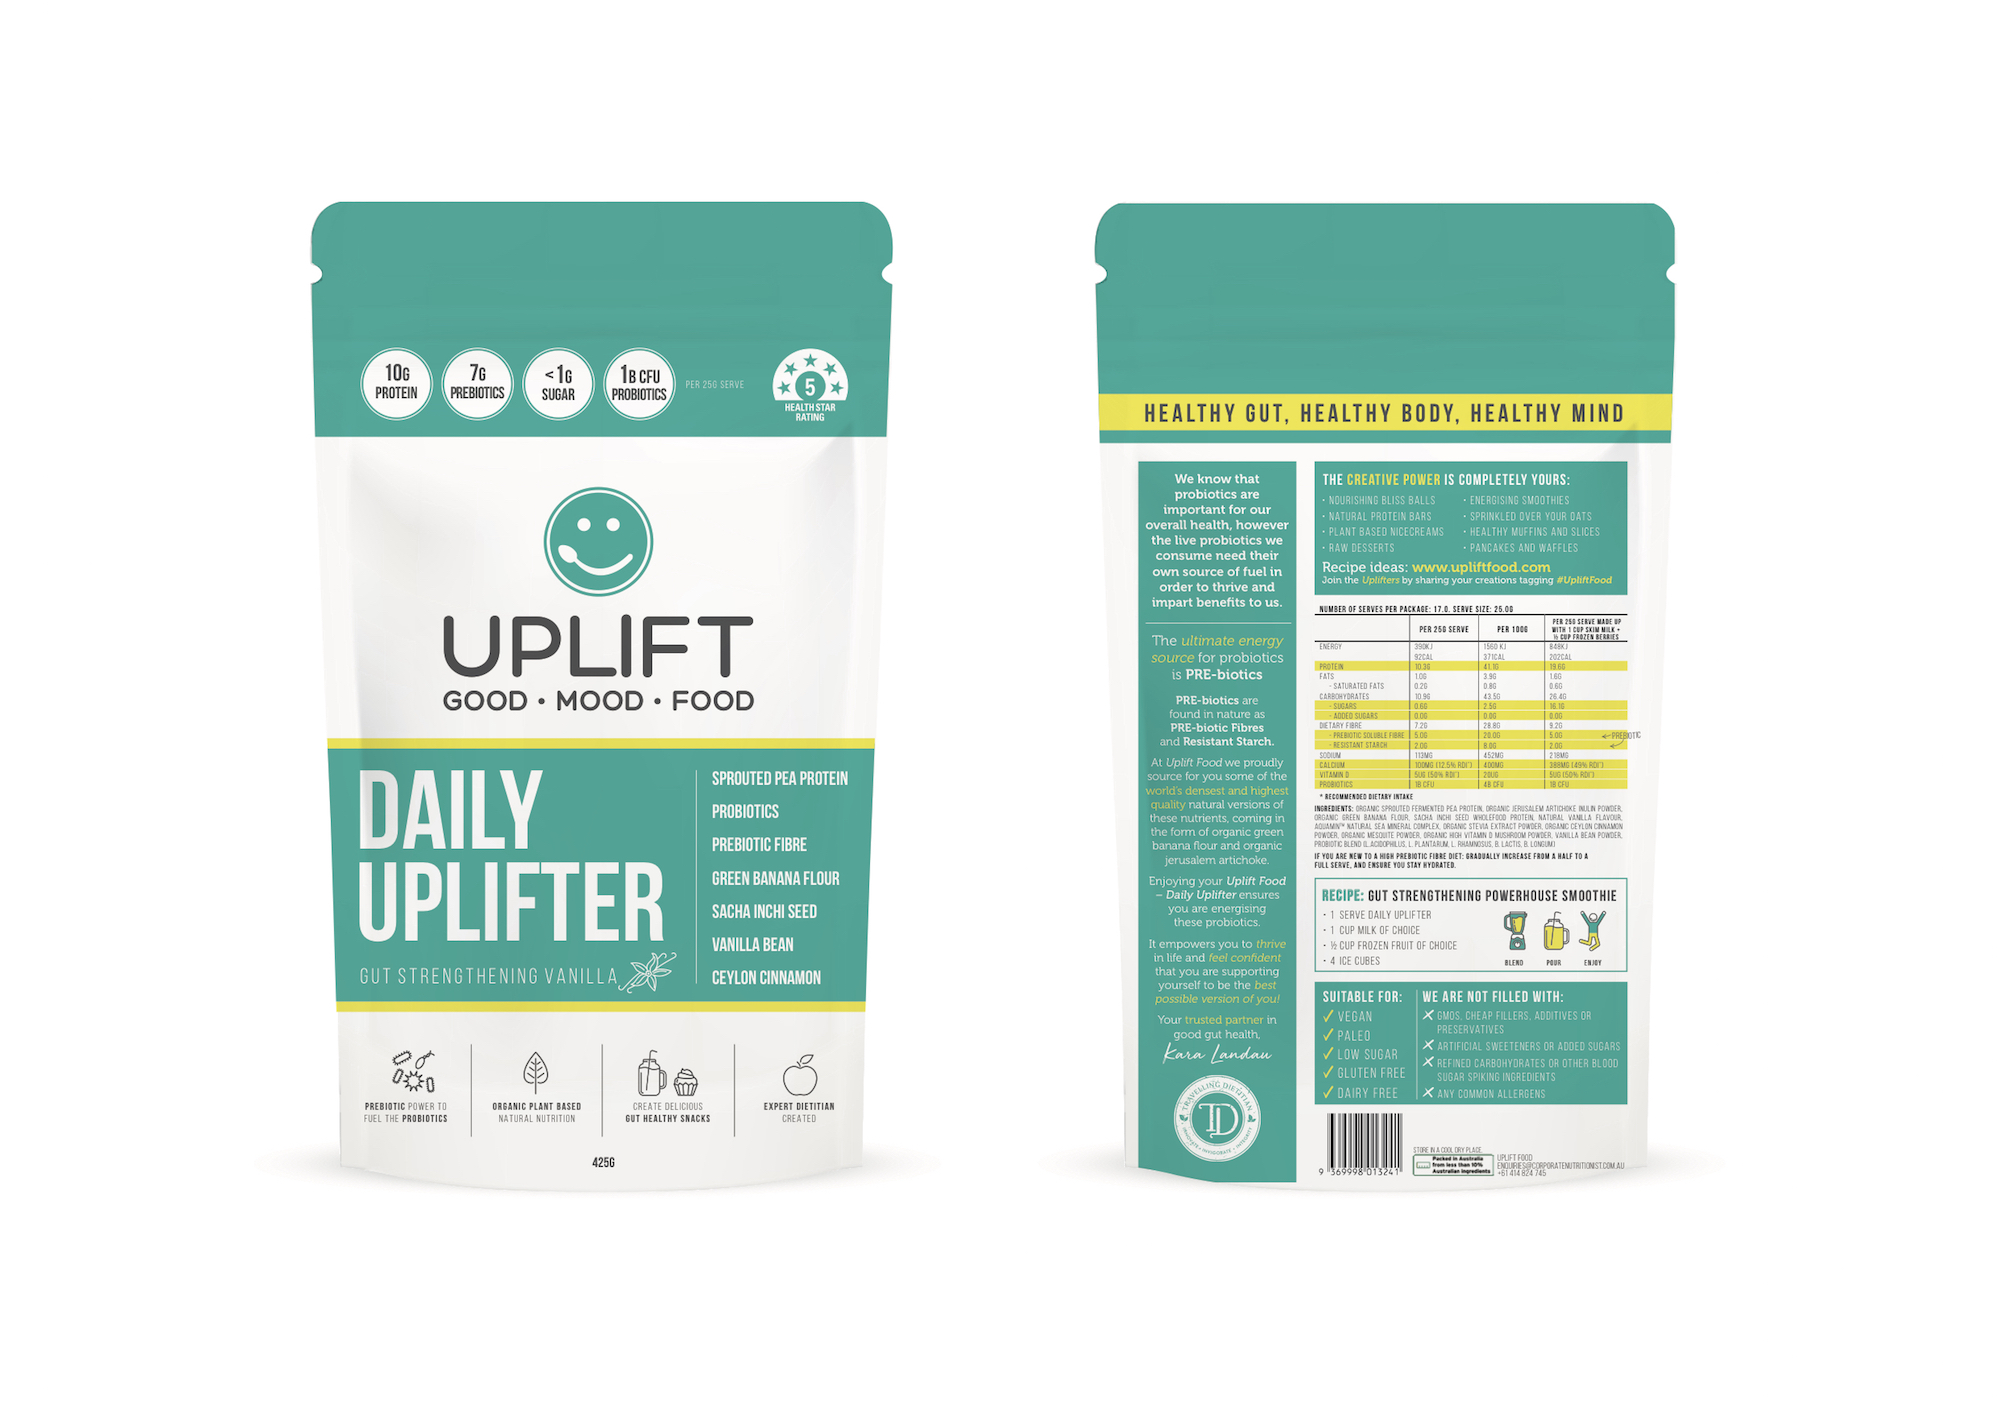 Uplift Food Daily Uplifter - The best prebiotic fibre and resistant starch food product.